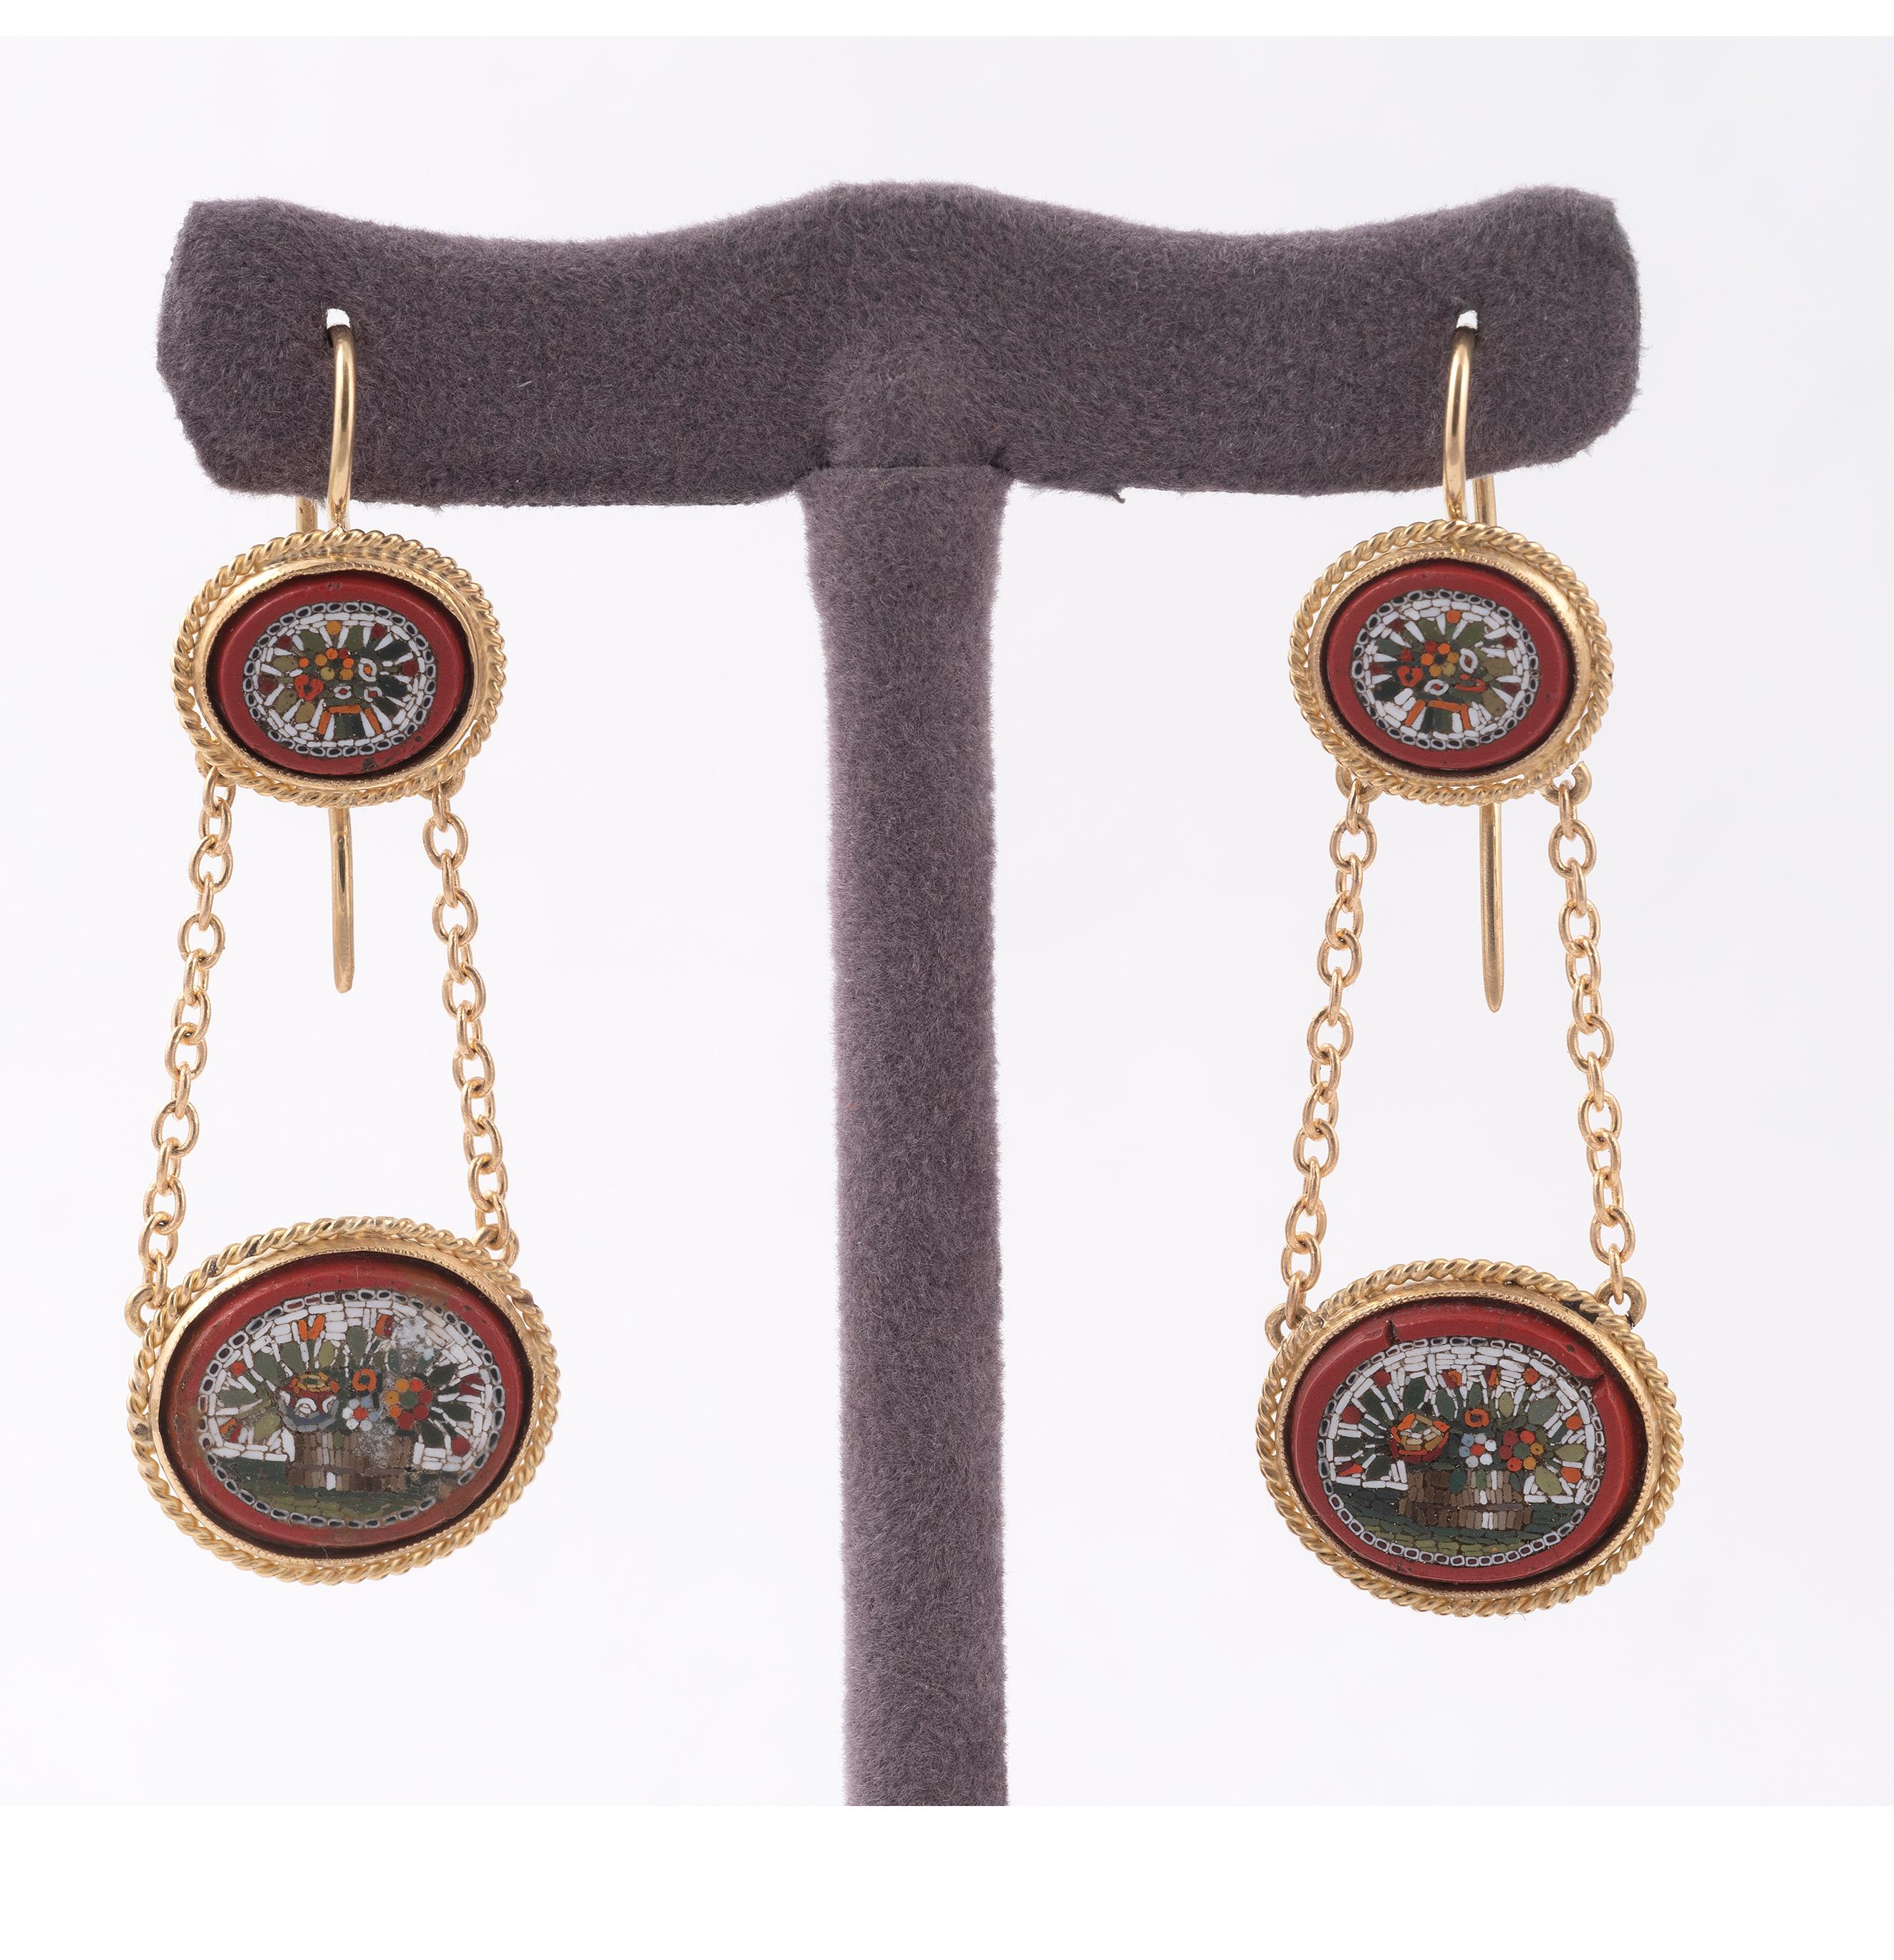 Pair of 19th century floral micromosaic and red-glass pendant earrings, Italian c.1860
with a large oval red-glass panel hung horizontally on two chain below a smaller one, each inset with a mosaic depicting a basket with flowers in full bloom,